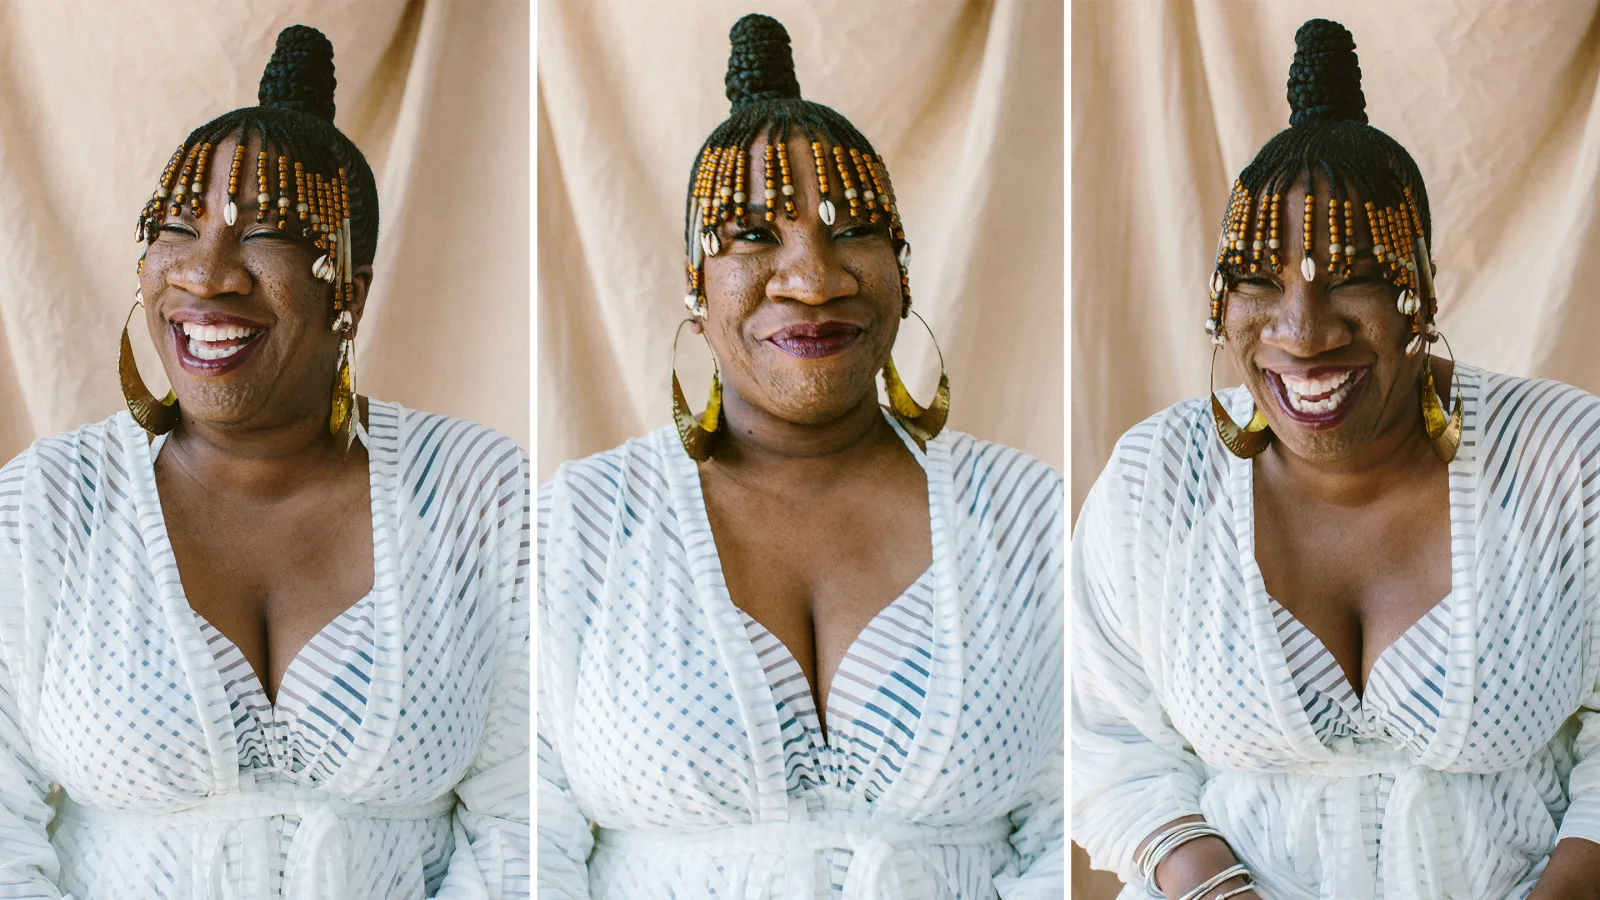 2019 - dream hampton, executive producer of Surviving R. Kelly, conducts an interview with Tarana Burke, the pioneering activist who started the #MeToo movement. (Image: Tarana Burke by Carissa Gallo.)